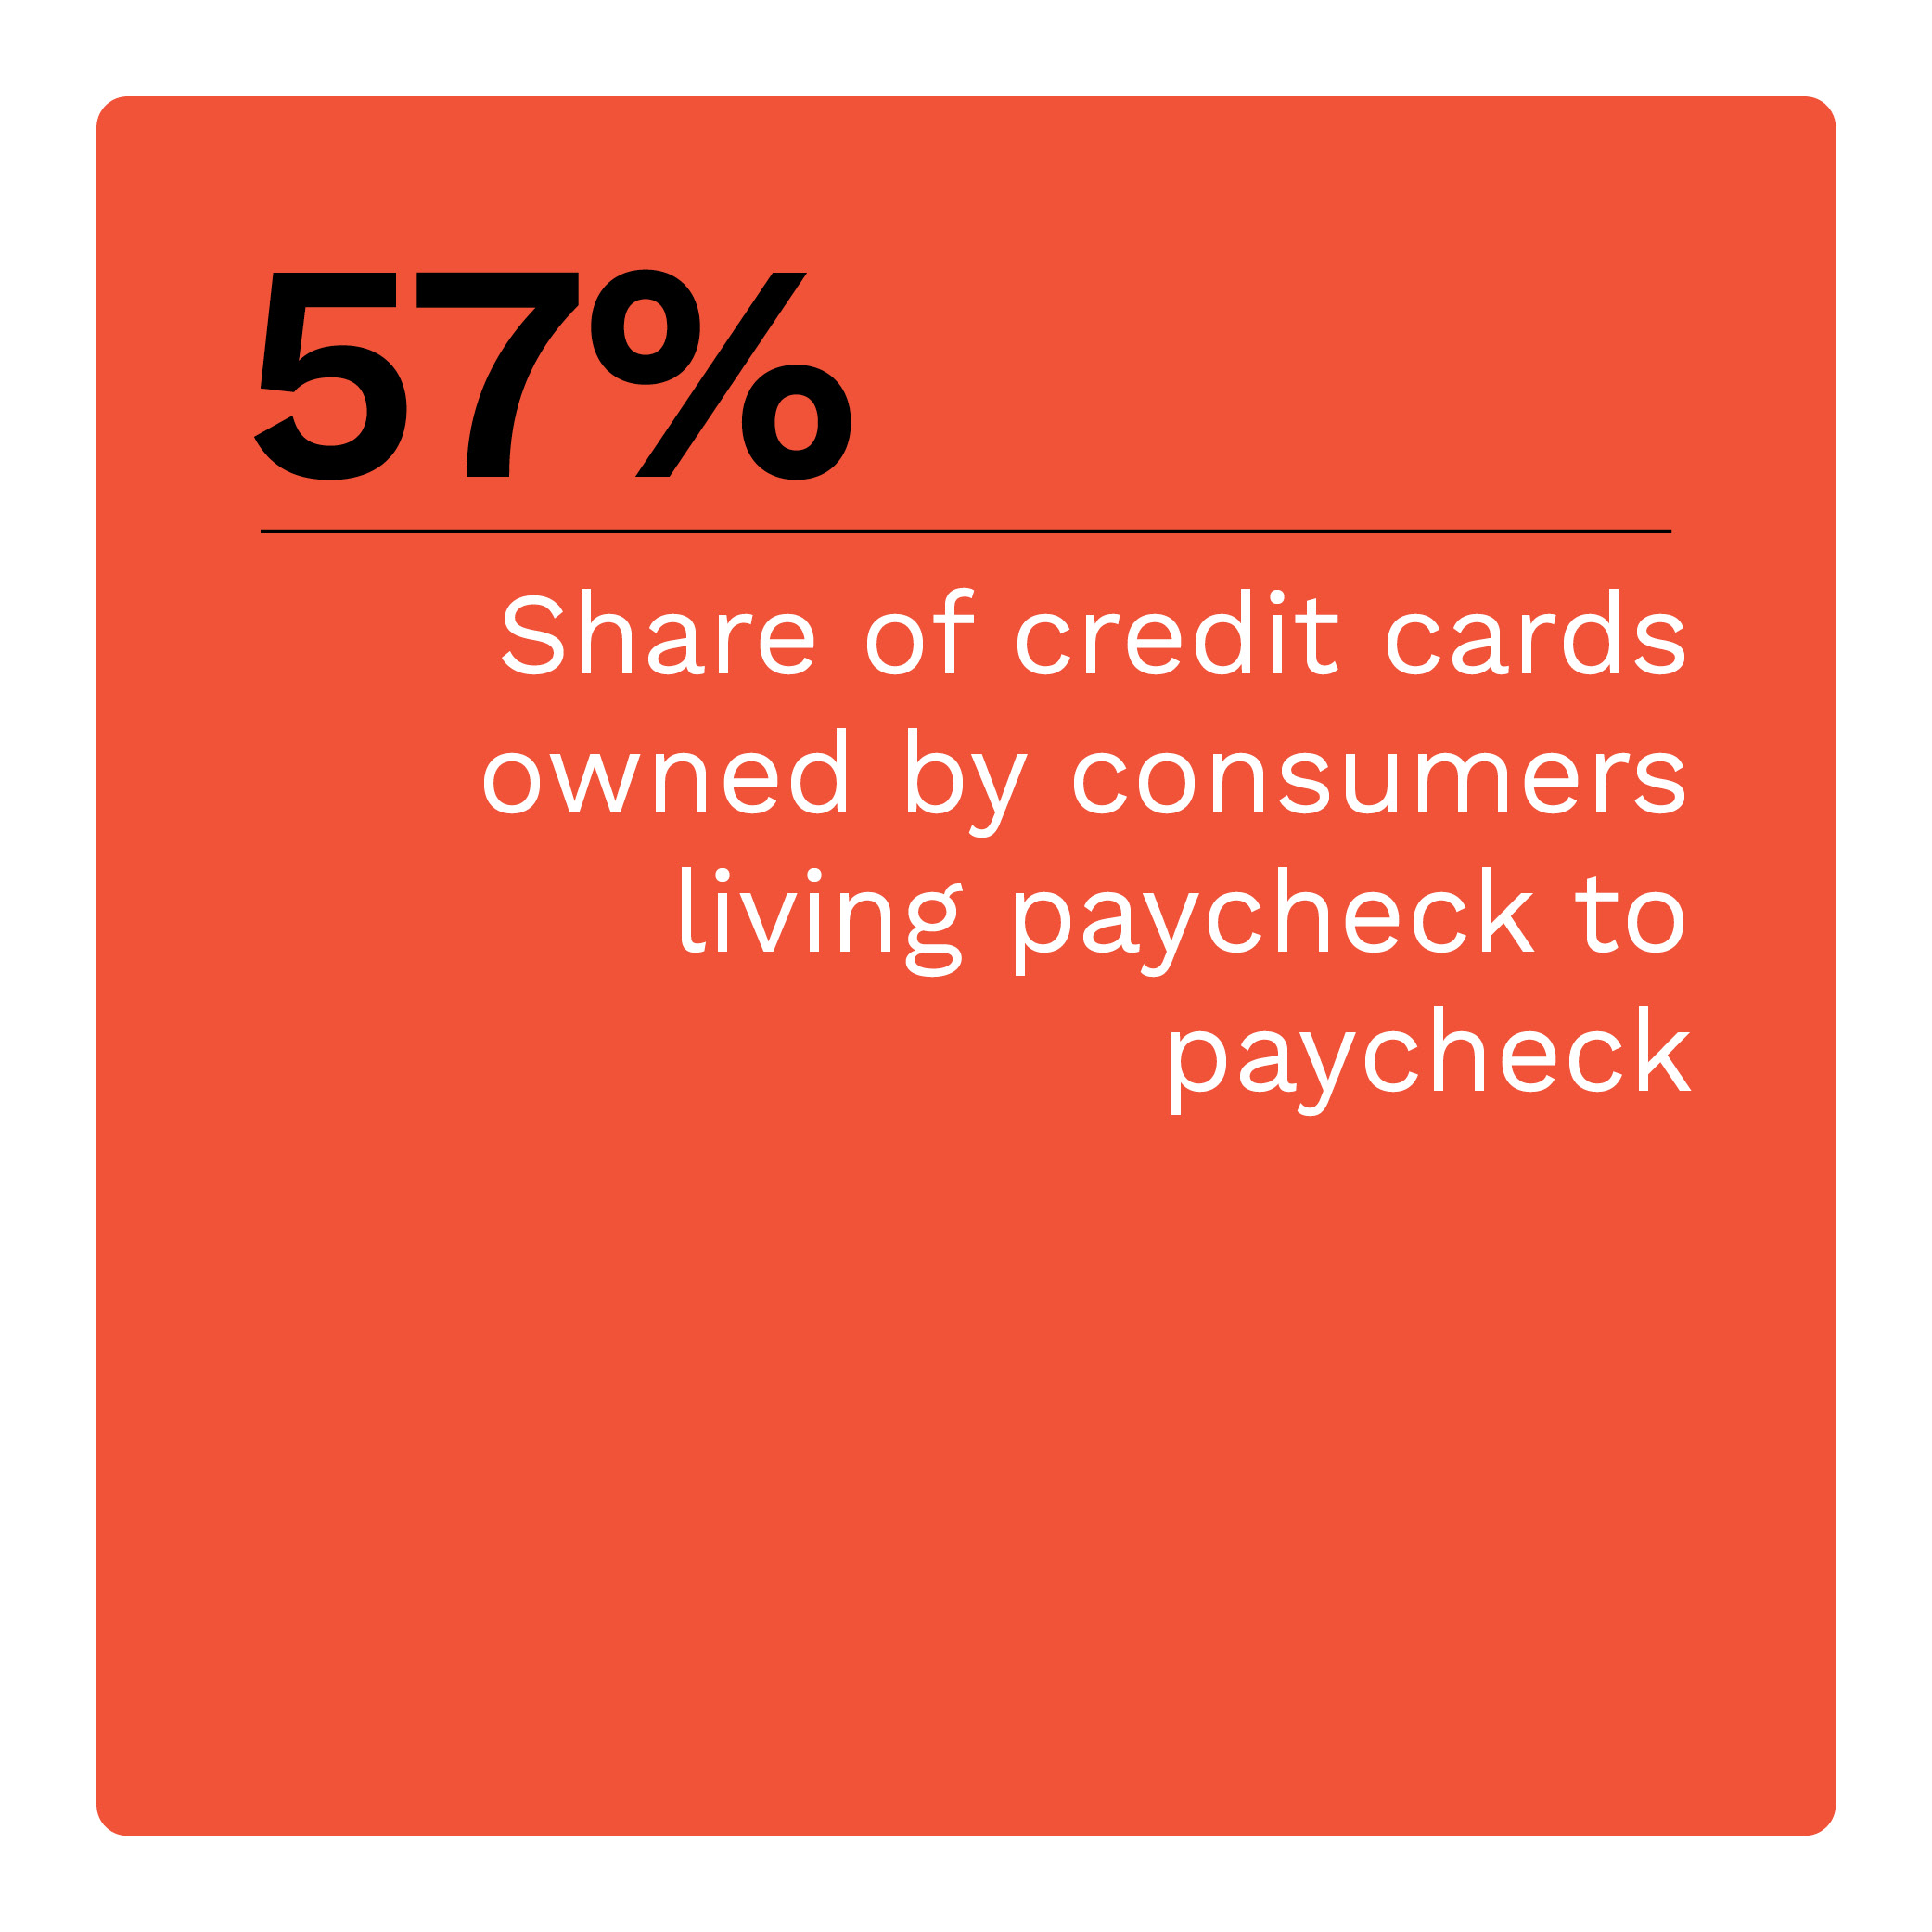 57%: Share of credit cards owned by consumers living paycheck to paycheck